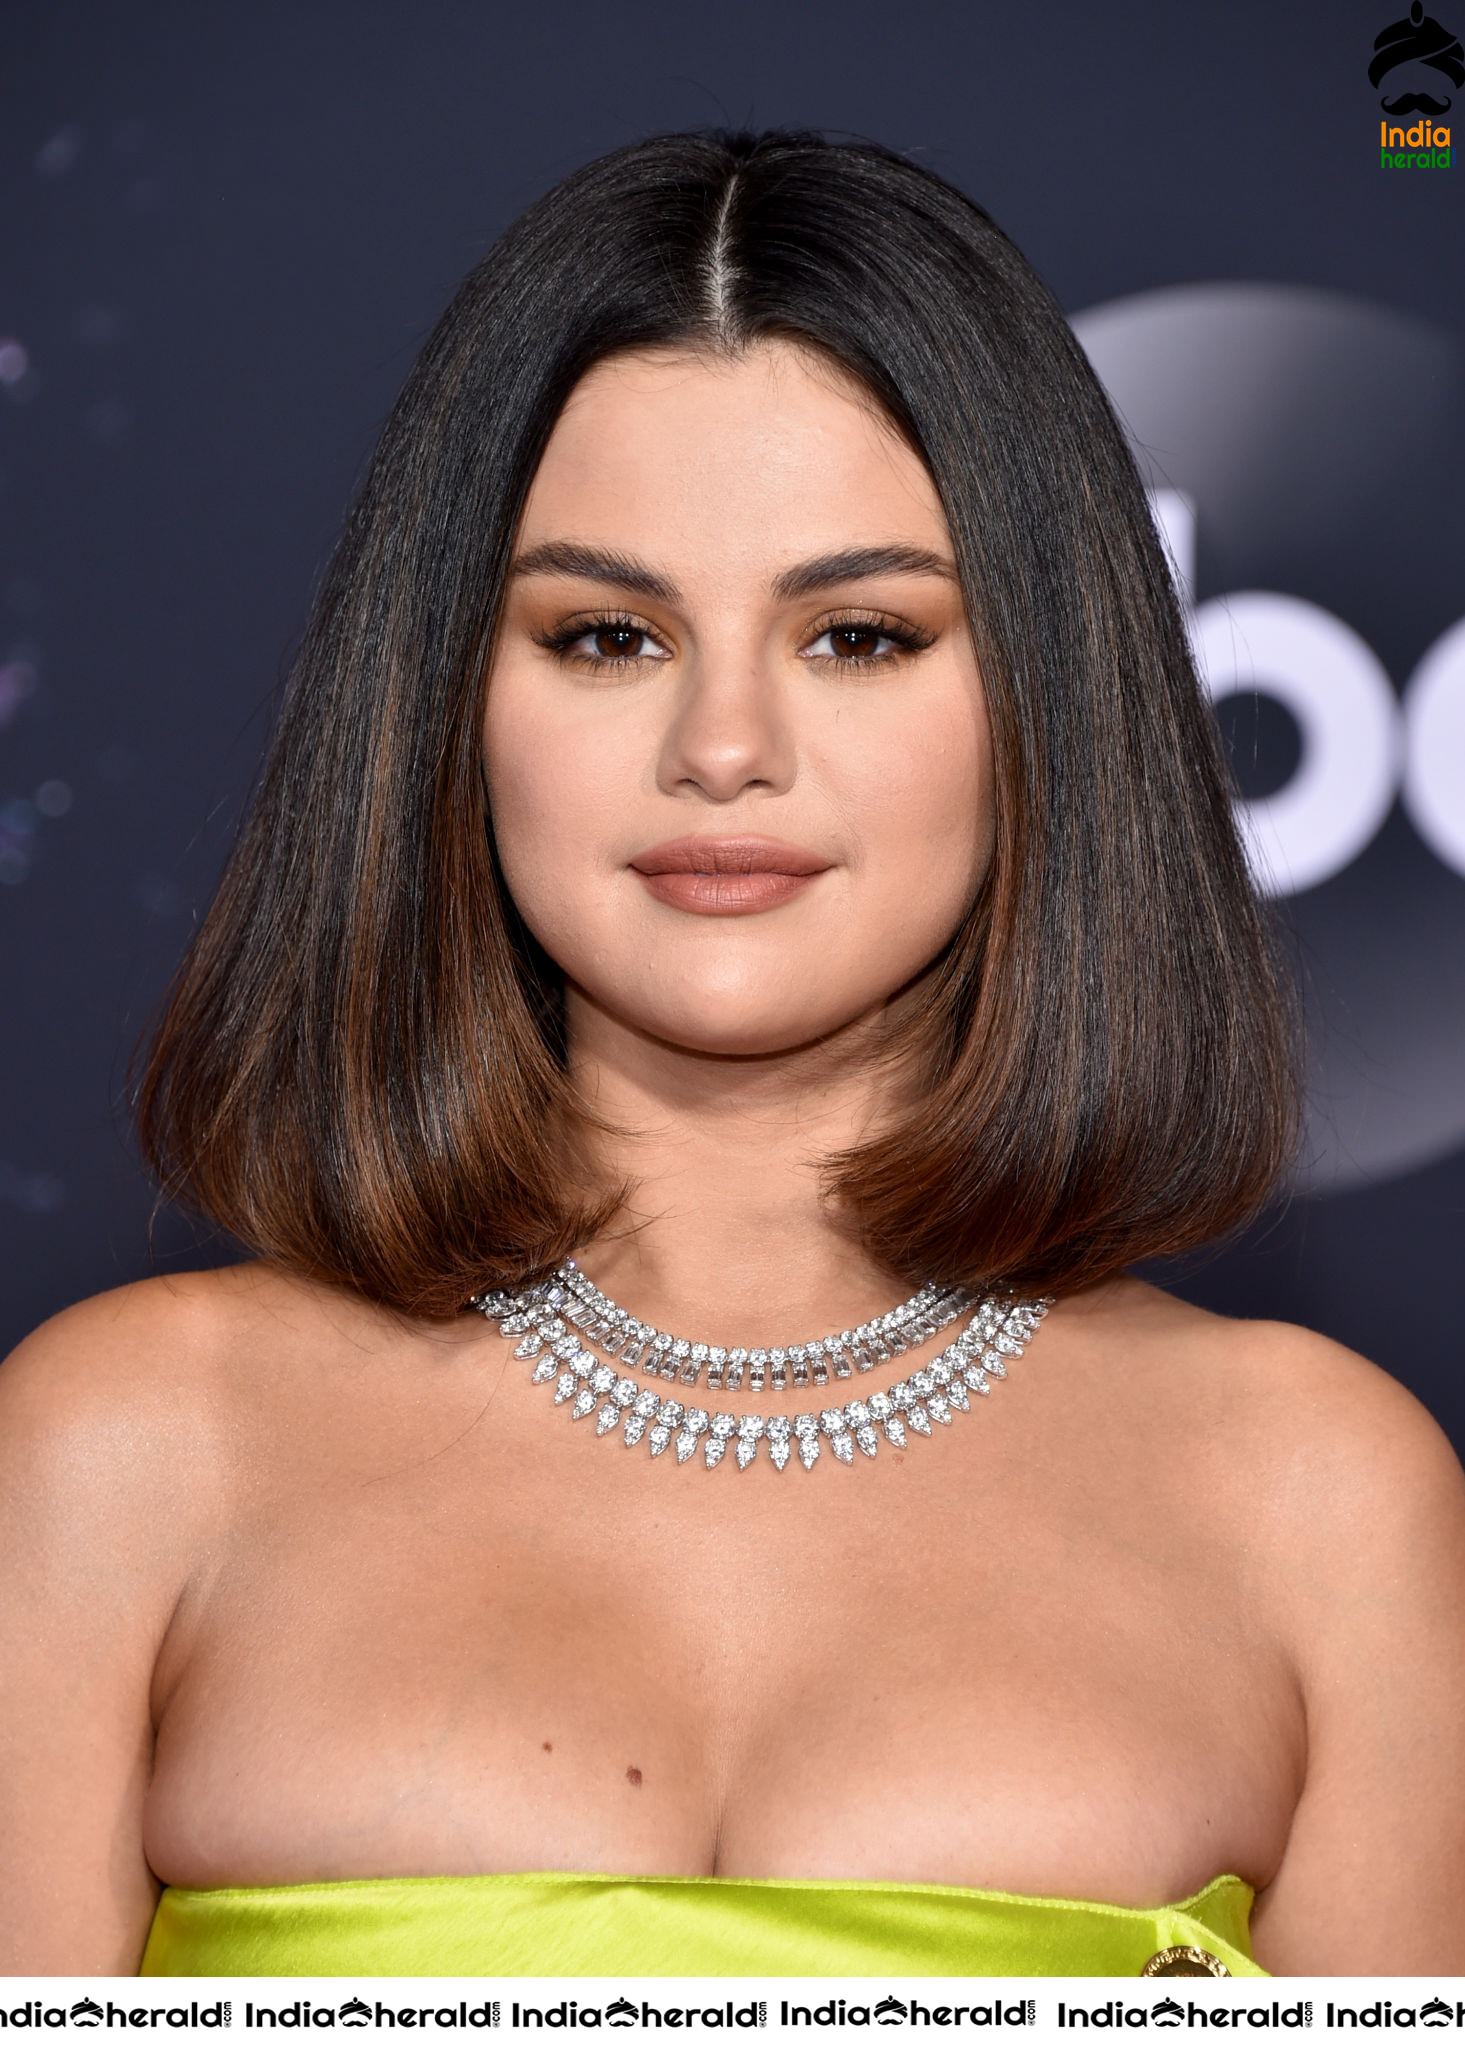 Selena Gomez at the 2019 American Music Awards in Los Angeles Set 2